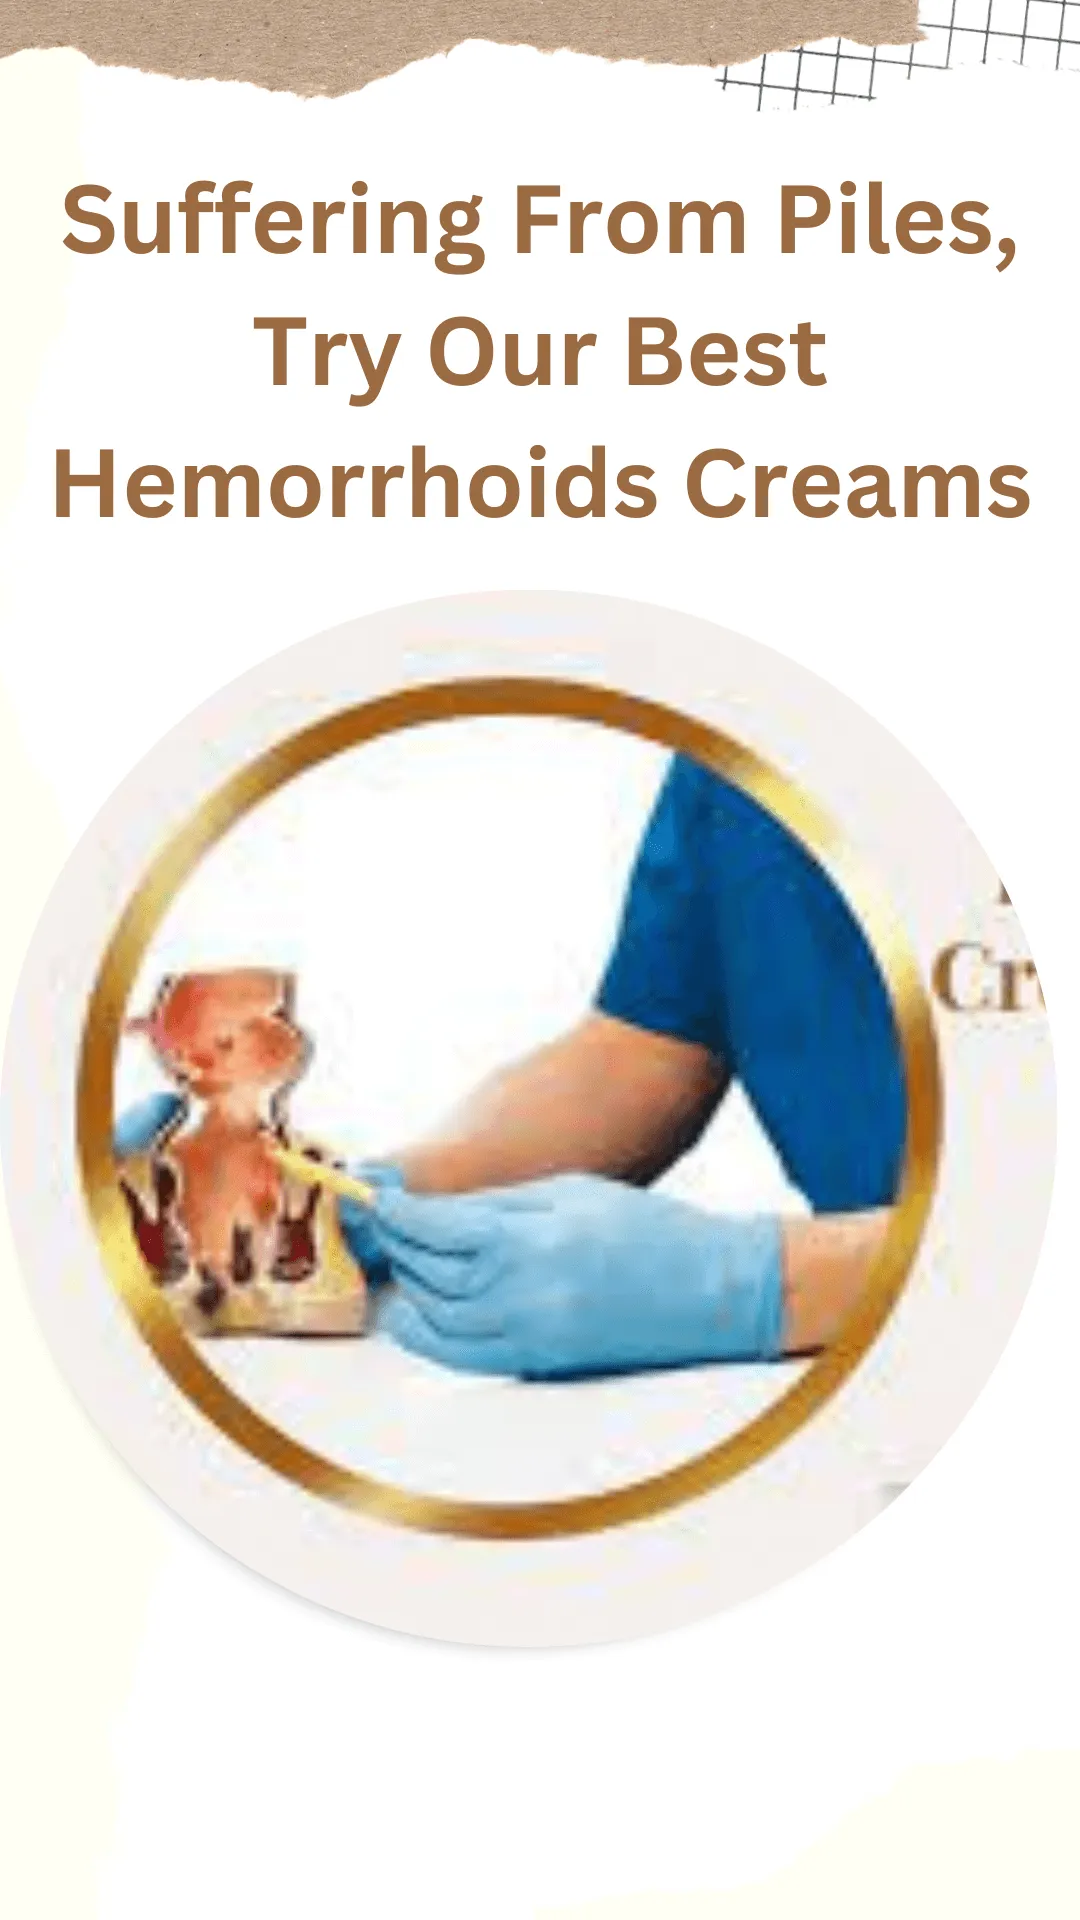 Suffering From Piles, Try Our Best Hemorrhoids Creams